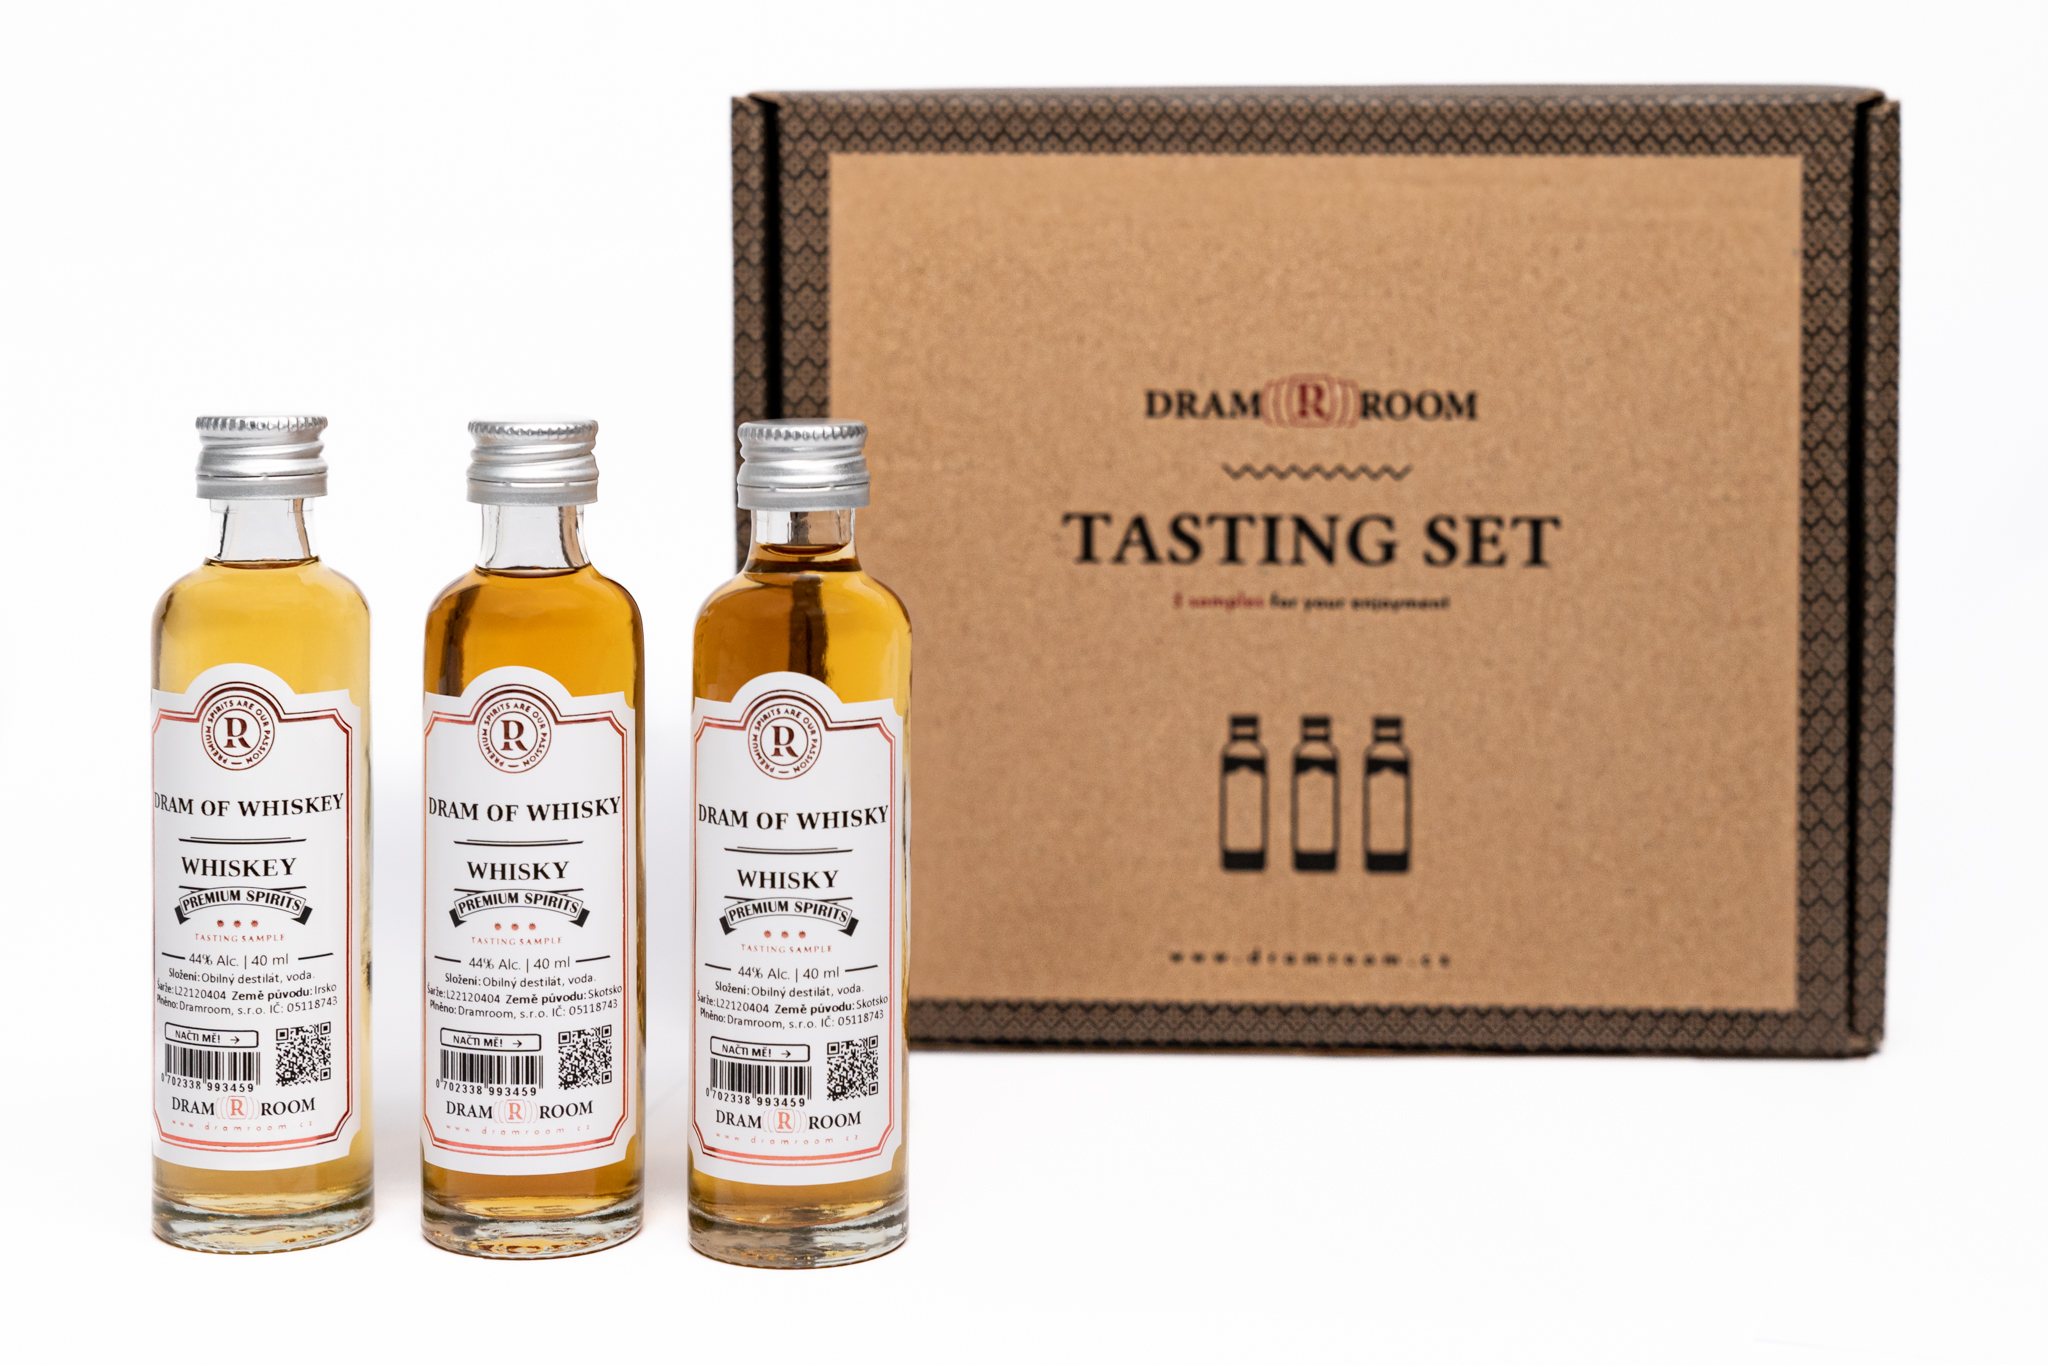 SPECIAL DIAGEO 2020 - whisky pack